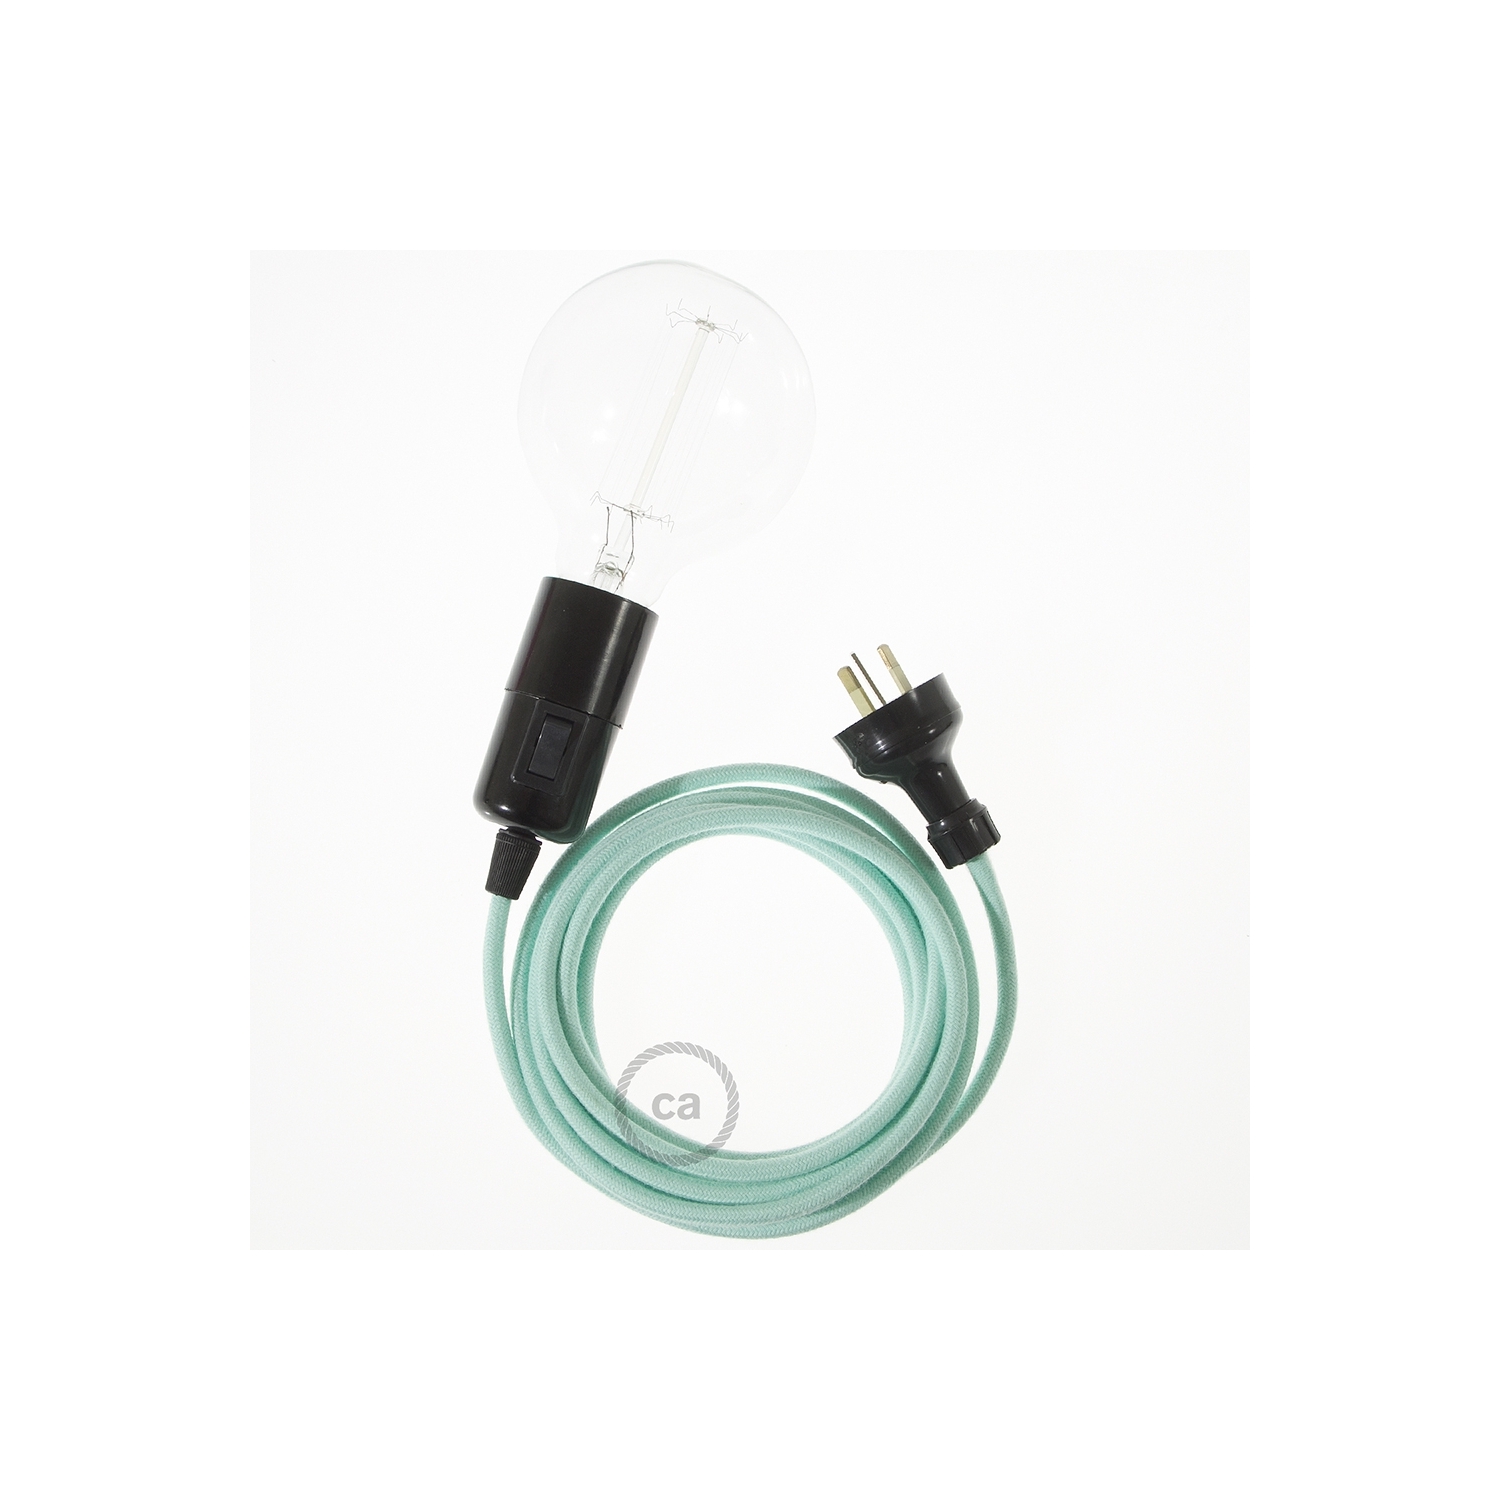 Create your RC34 Milk and Mint Cotton Snake and bring the light wherever you want.